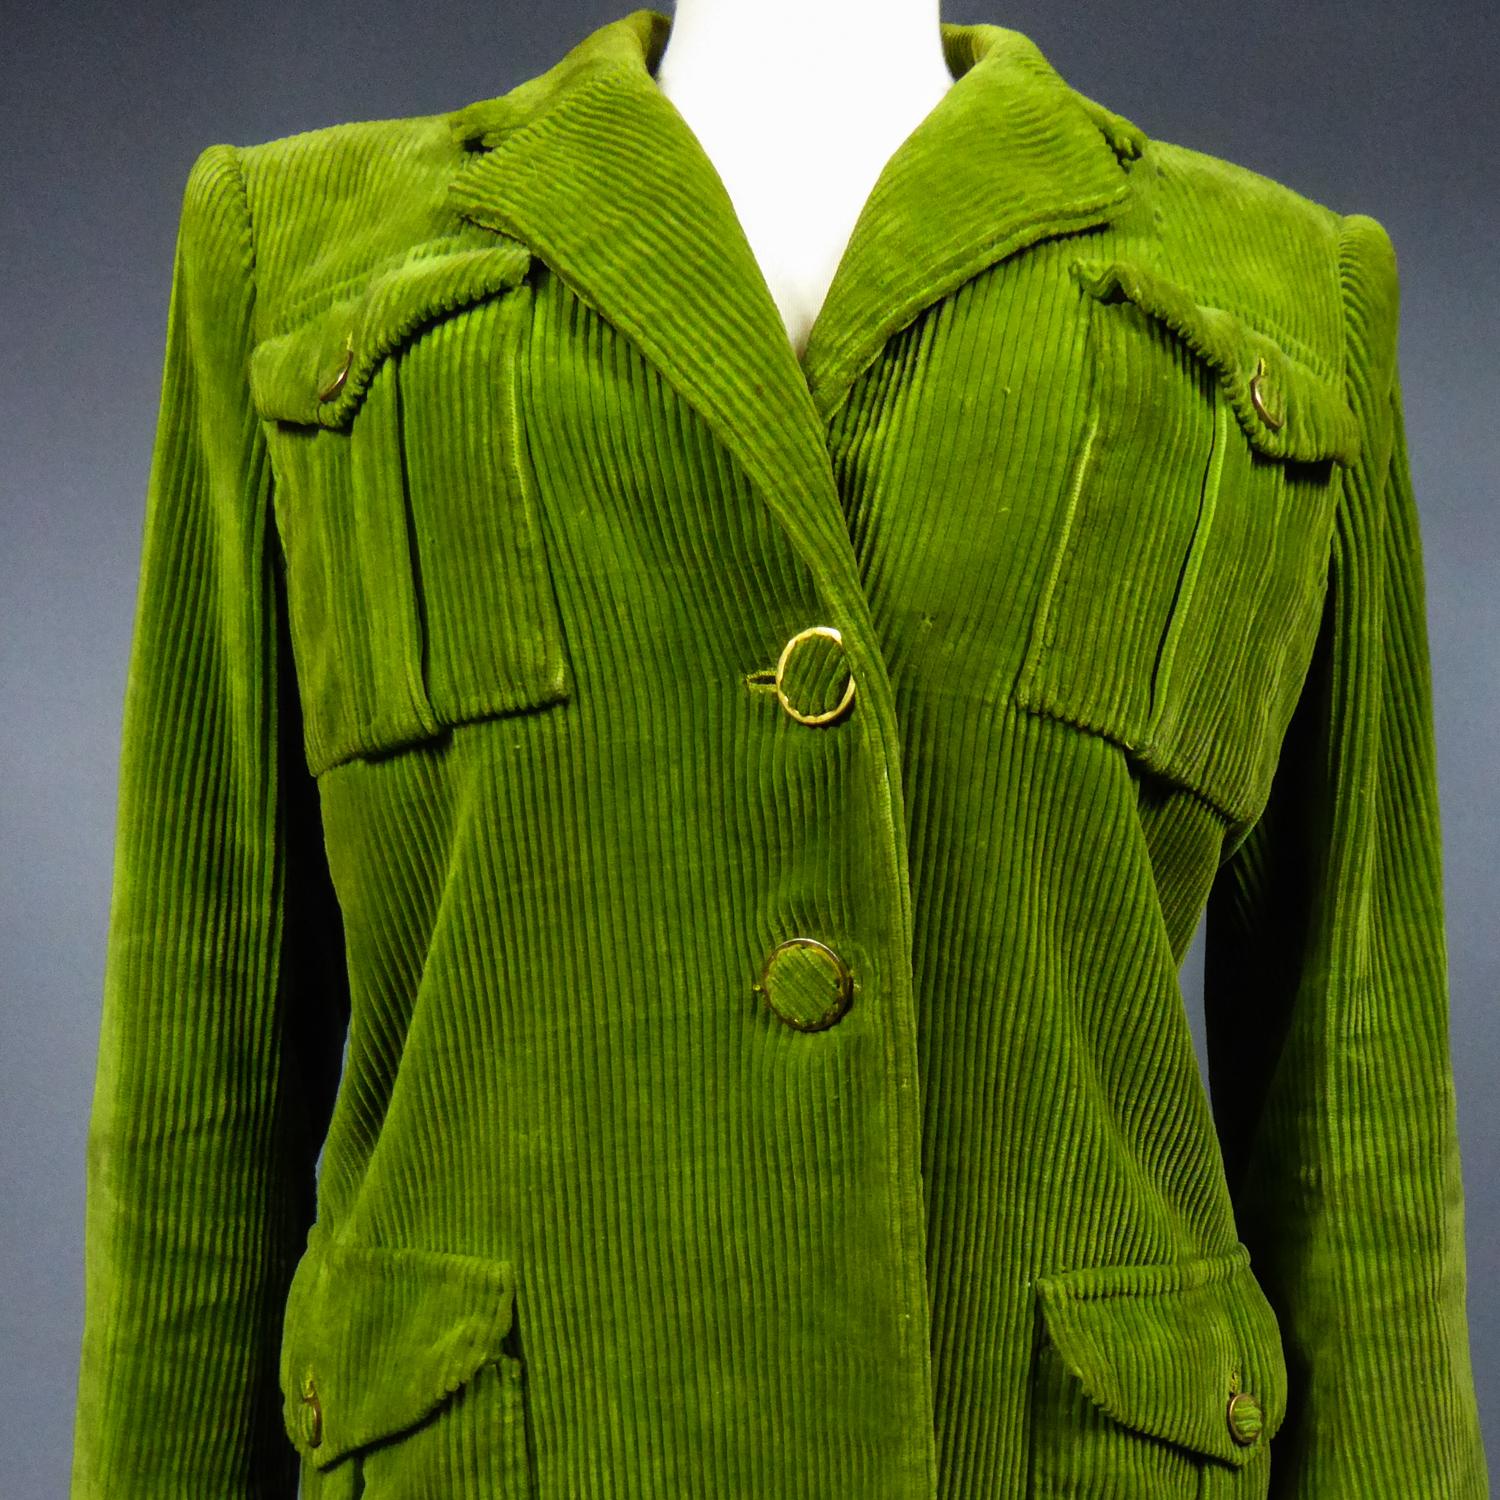 Summer Collection 1947
France

Rare women's sports jacket (Golf, riding or winter sport?) in olive-green corduroy with broad shoulder pads and signed Jeanne Lanvin, Haute Couture, summer collection 1947. Men's wardrobe inspiration for this